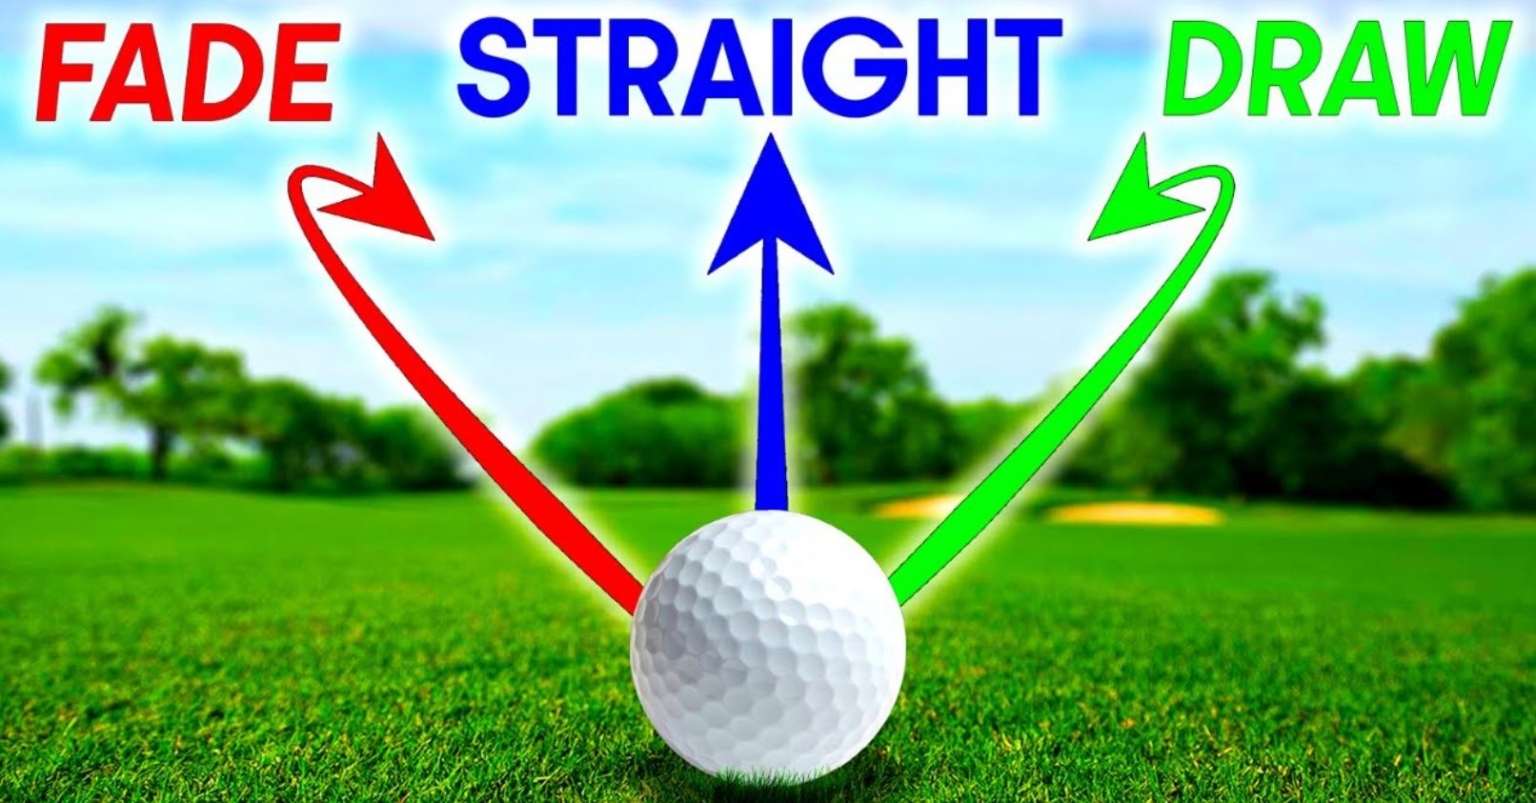 Draw Vs Fade In Golf – What’s The Difference And What’s Better - The